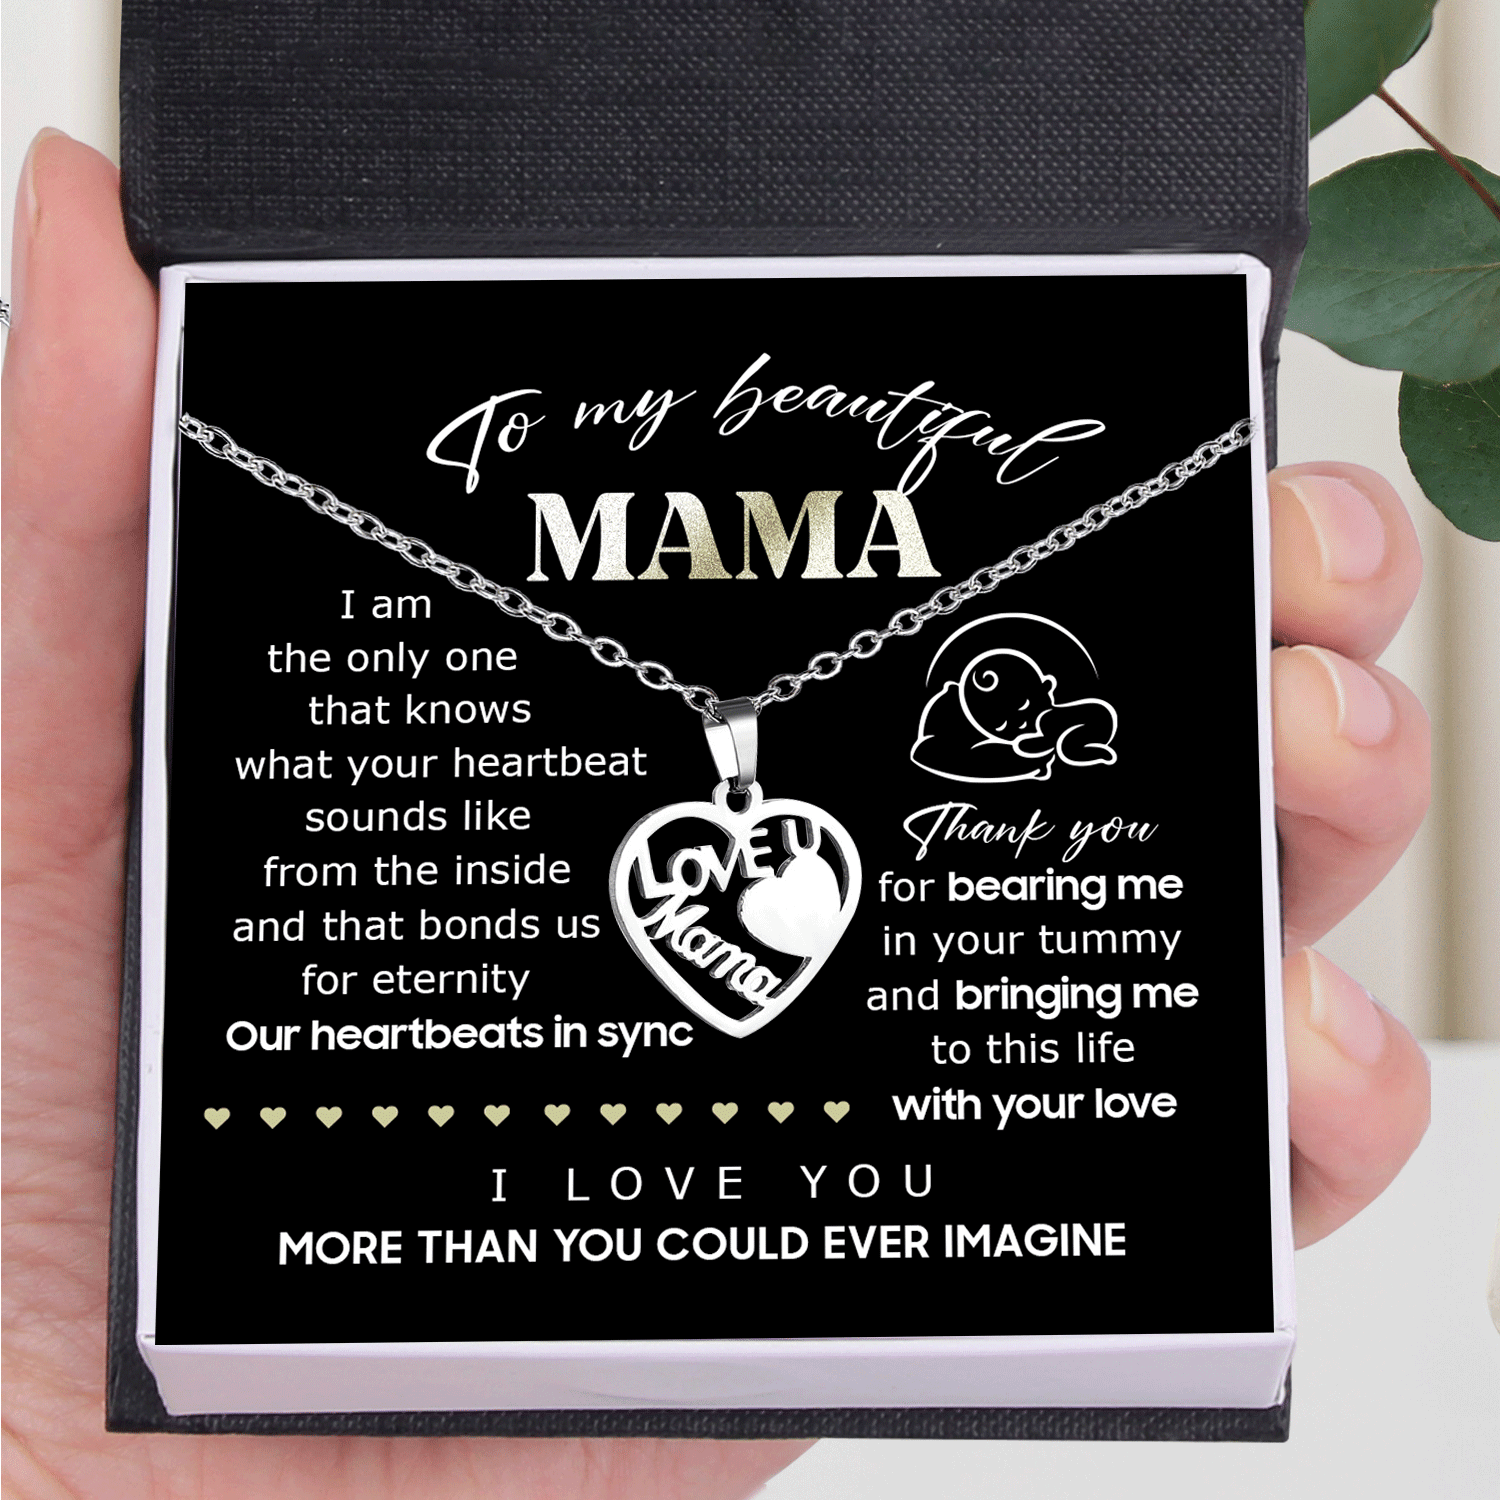 Love Mama Heart Necklace - Family - To My Beautiful Mama - I Love You More Than You Could Ever Imagine - Augnoj19002 - Gifts Holder